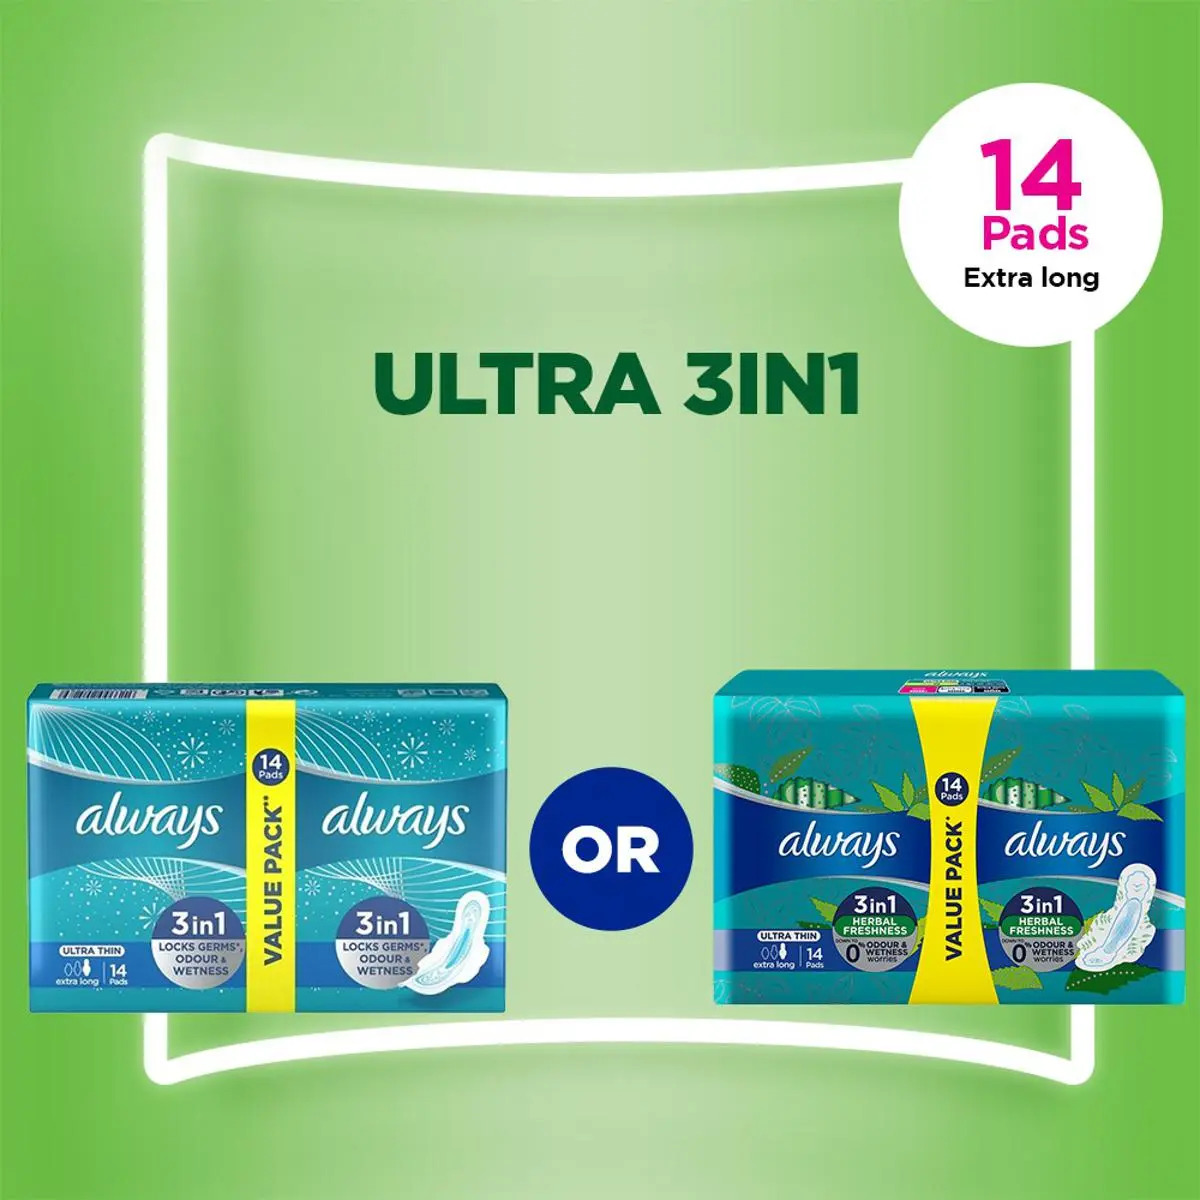 Always Ultra Sanitary Pads Extra Long Value Pack 14 pads